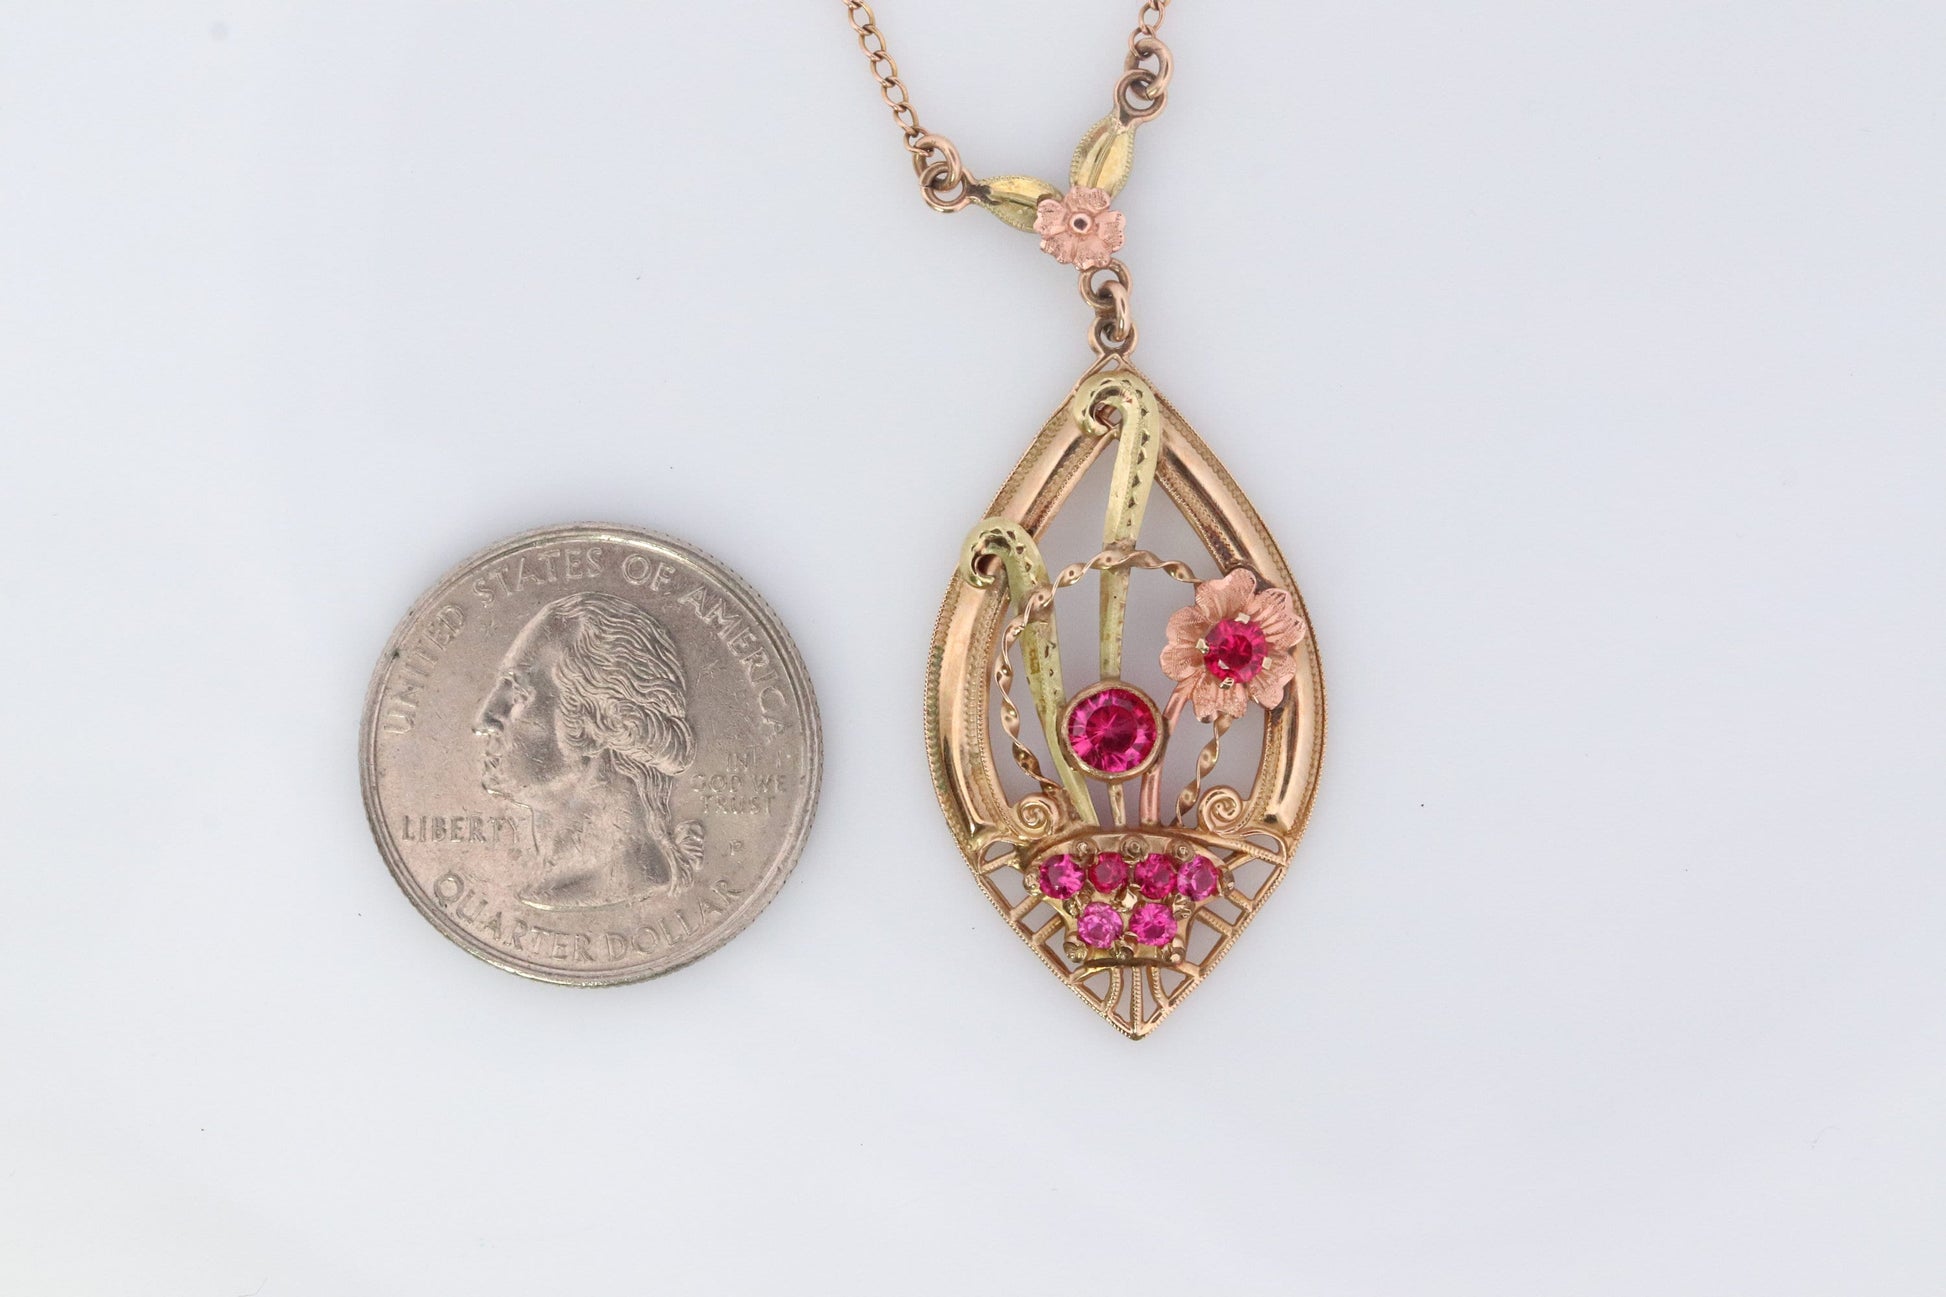 Antique Victorian Lavaliere Pendant Necklace. 10k Rose and Yellow Gold with Rubies. Early 1900s Large Rubies Pendant.